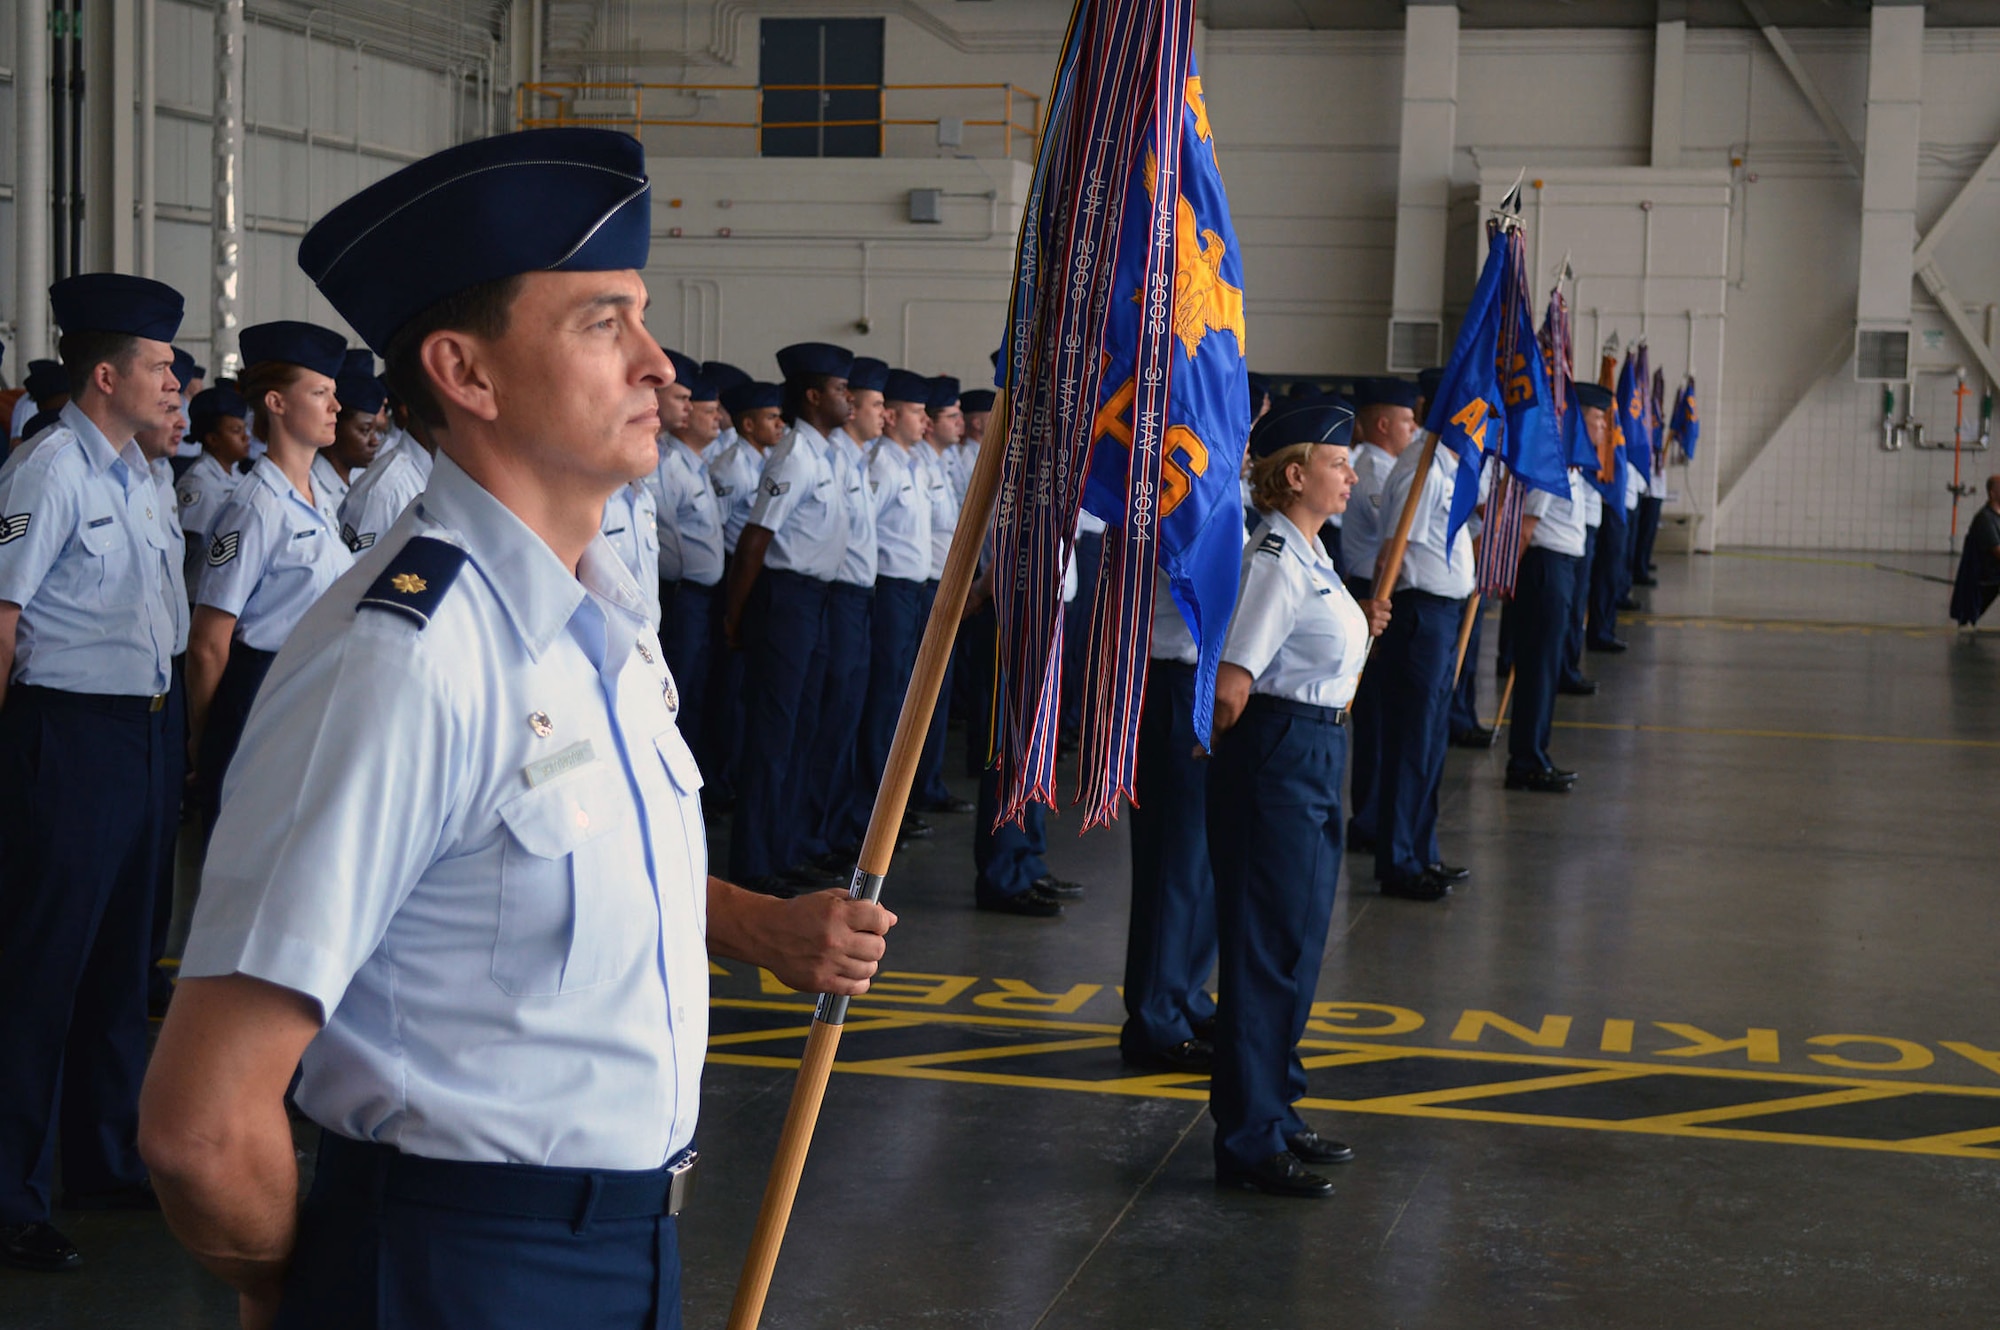 43rd Airlift Group Airmen stand in formation during the 43rd AG’s change of command ceremony on Aug. 5, Pope Army Airfield. Col. Kenneth E. Moss, 43rd Airlift Group commander, took command from the outgoing commander, Col. Daniel H. Tulley, who moves on to his next assignment as the commander for the 6th Air Mobility Wing, MacDill Air Force Base, Fla. (U.S. Air Force photo/Marvin Krause)